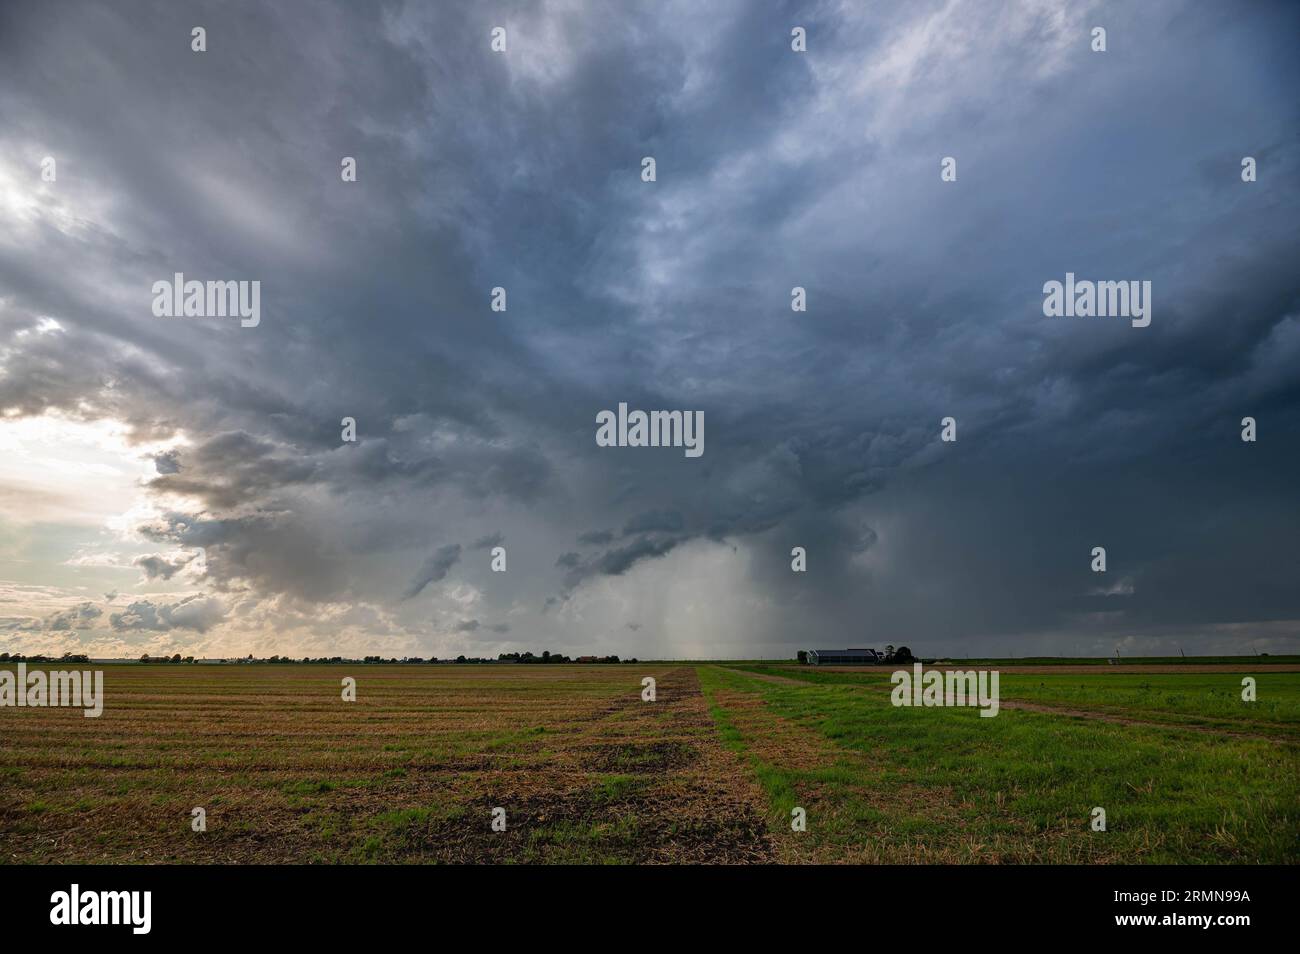 Storm cloud with heavy rain over the plains Stock Photo